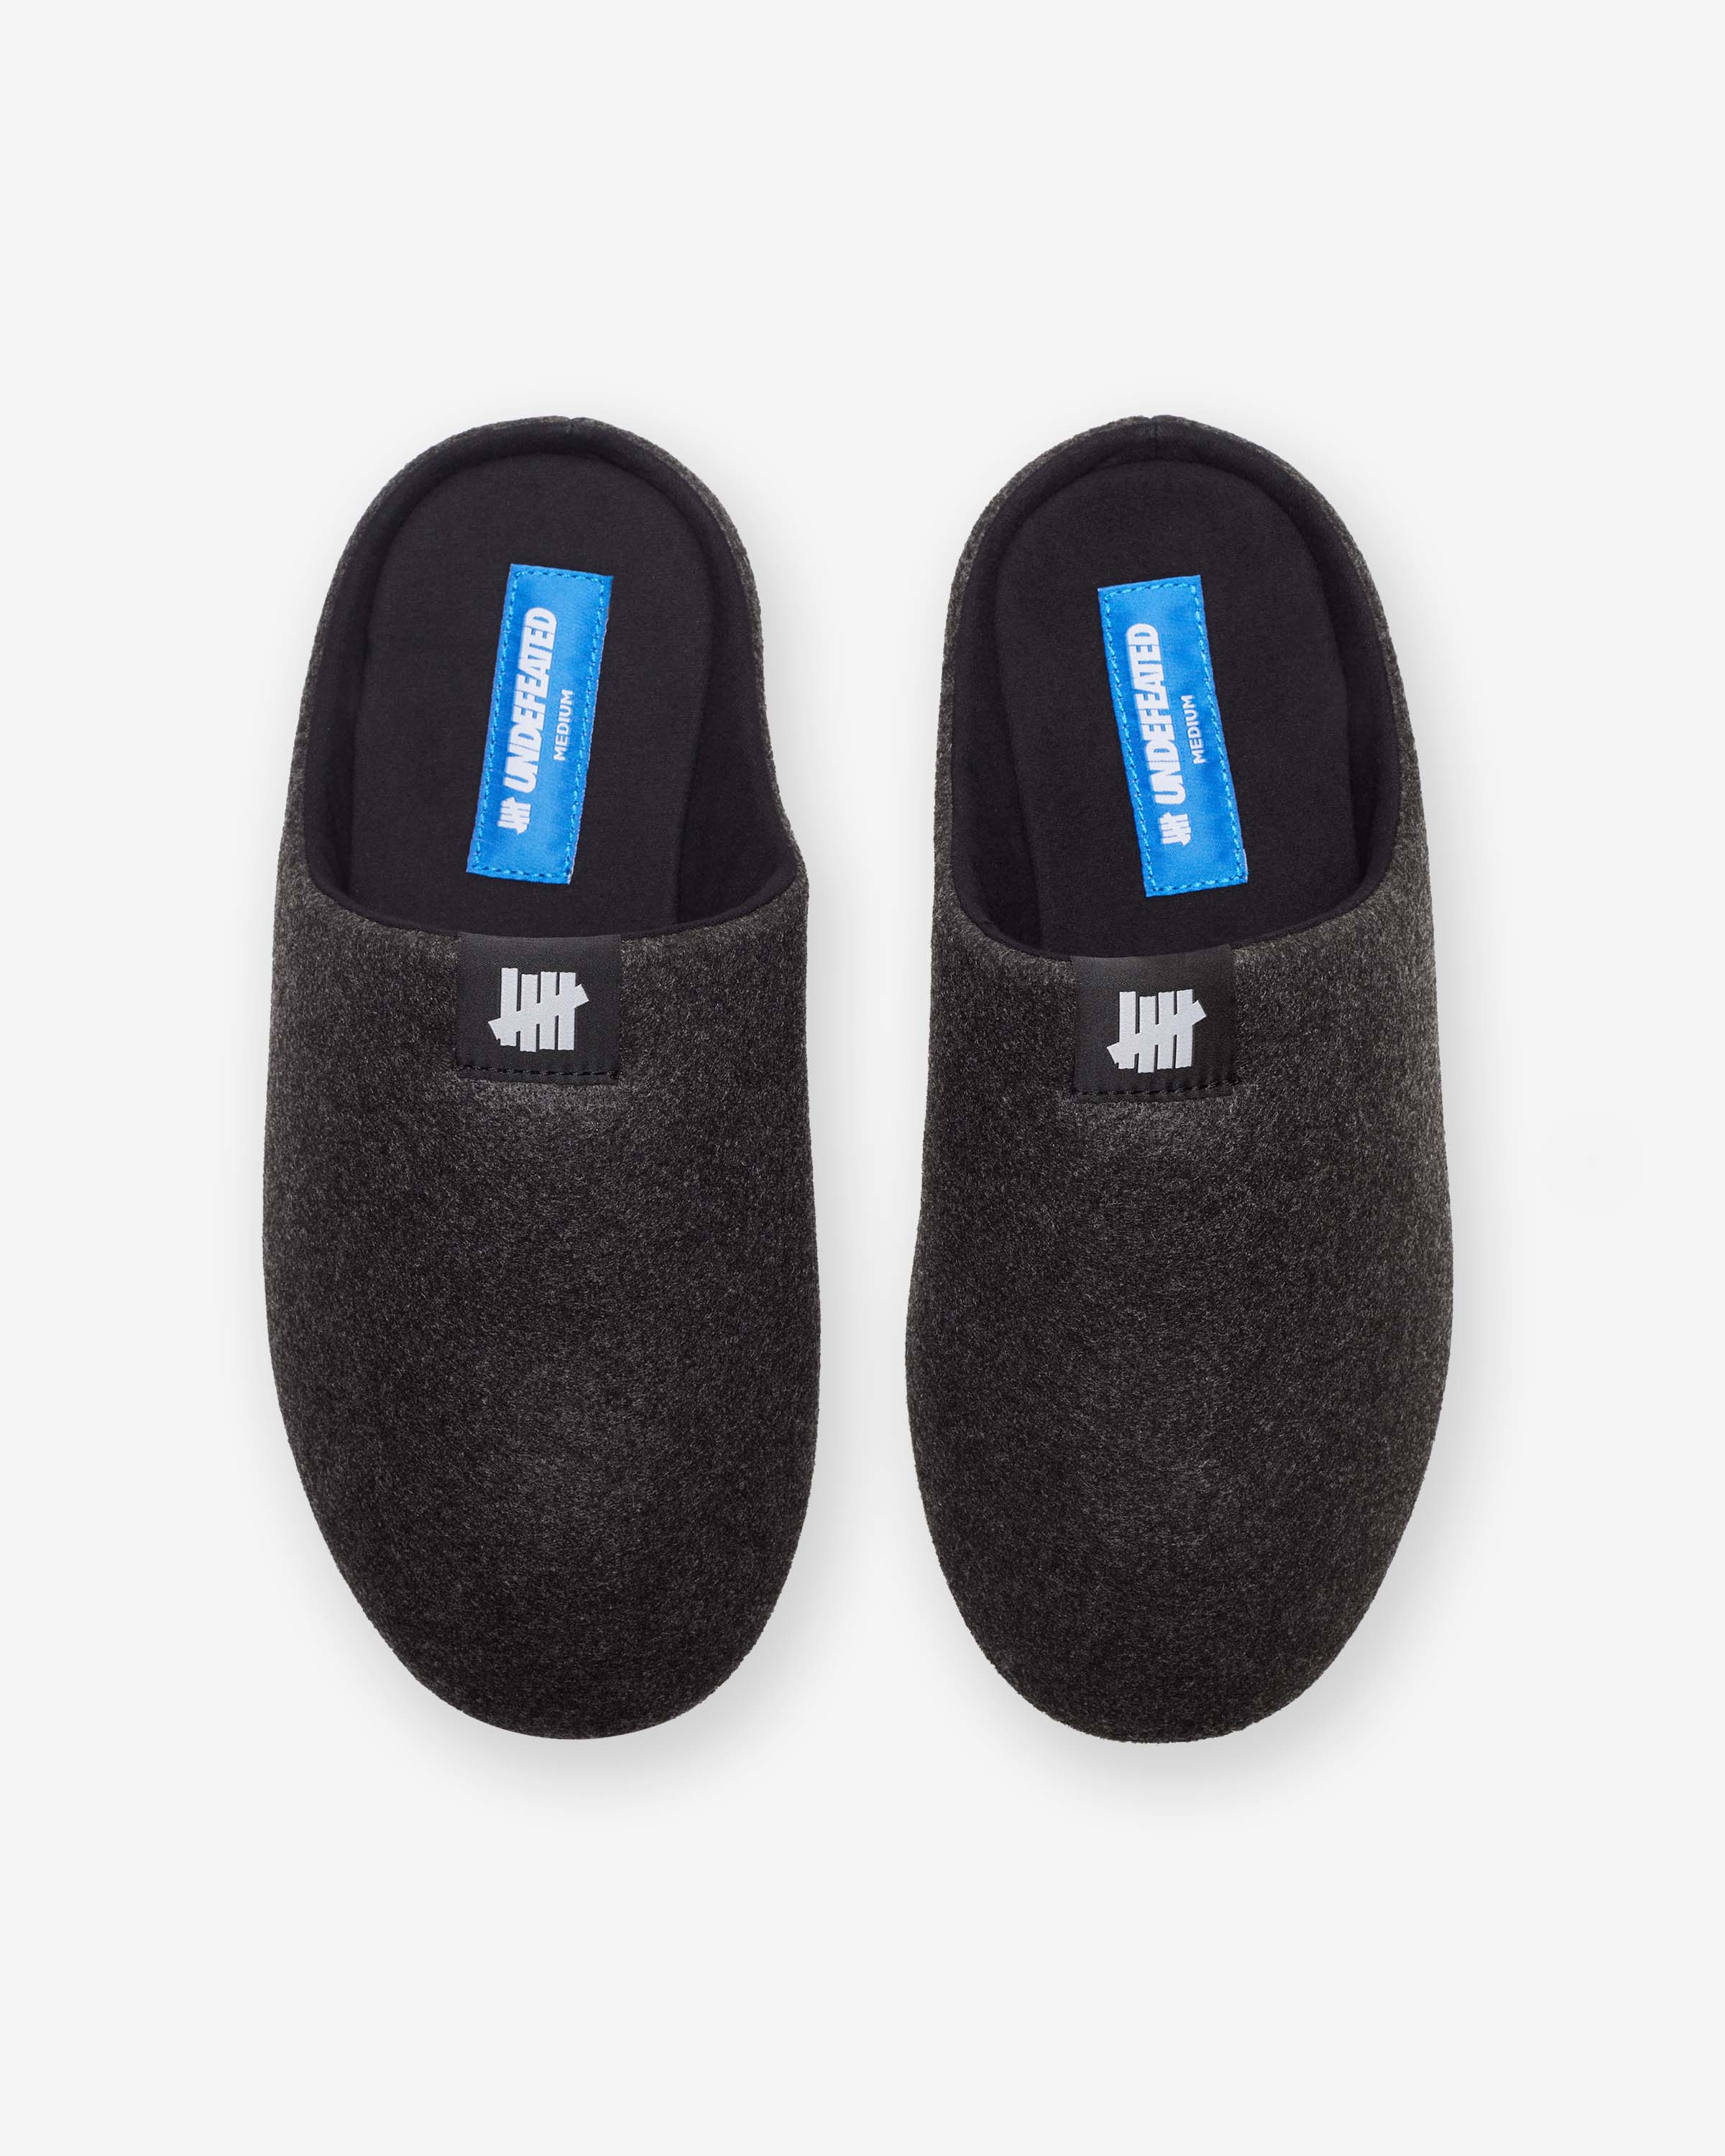 UNDEFEATED House Slippers Arrive